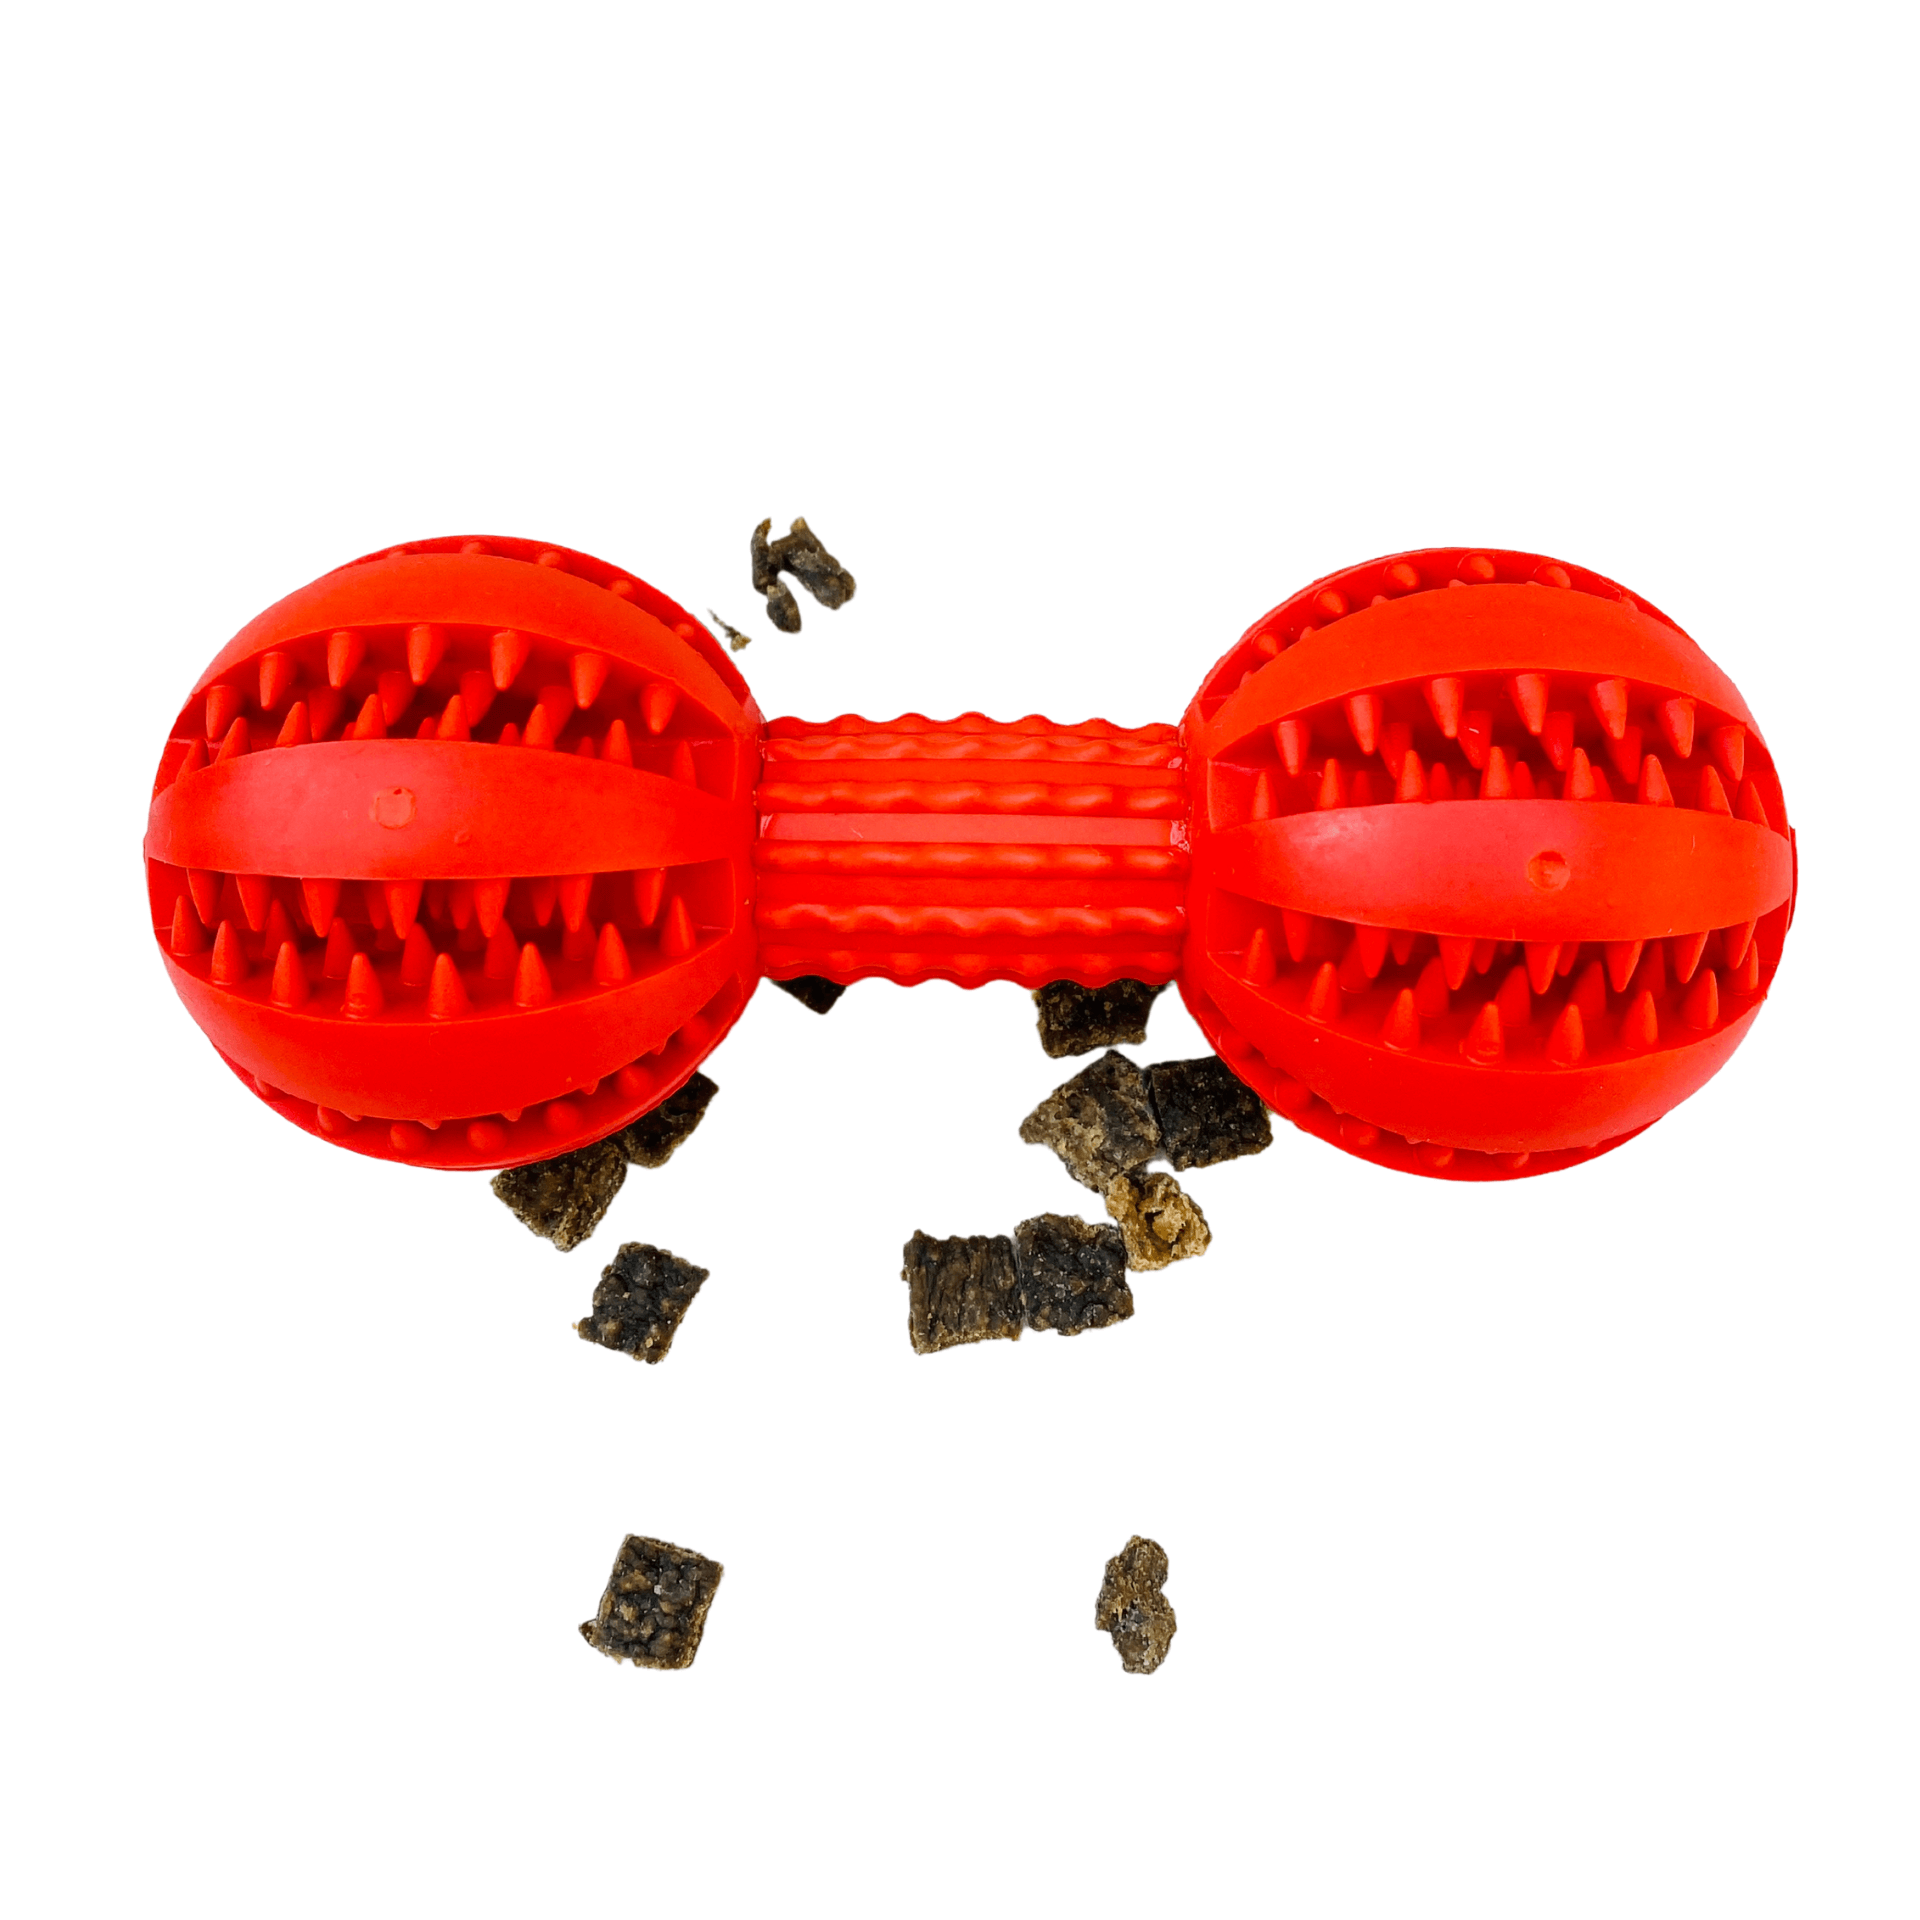 Let's Pawty interactive dumbbell dog toy